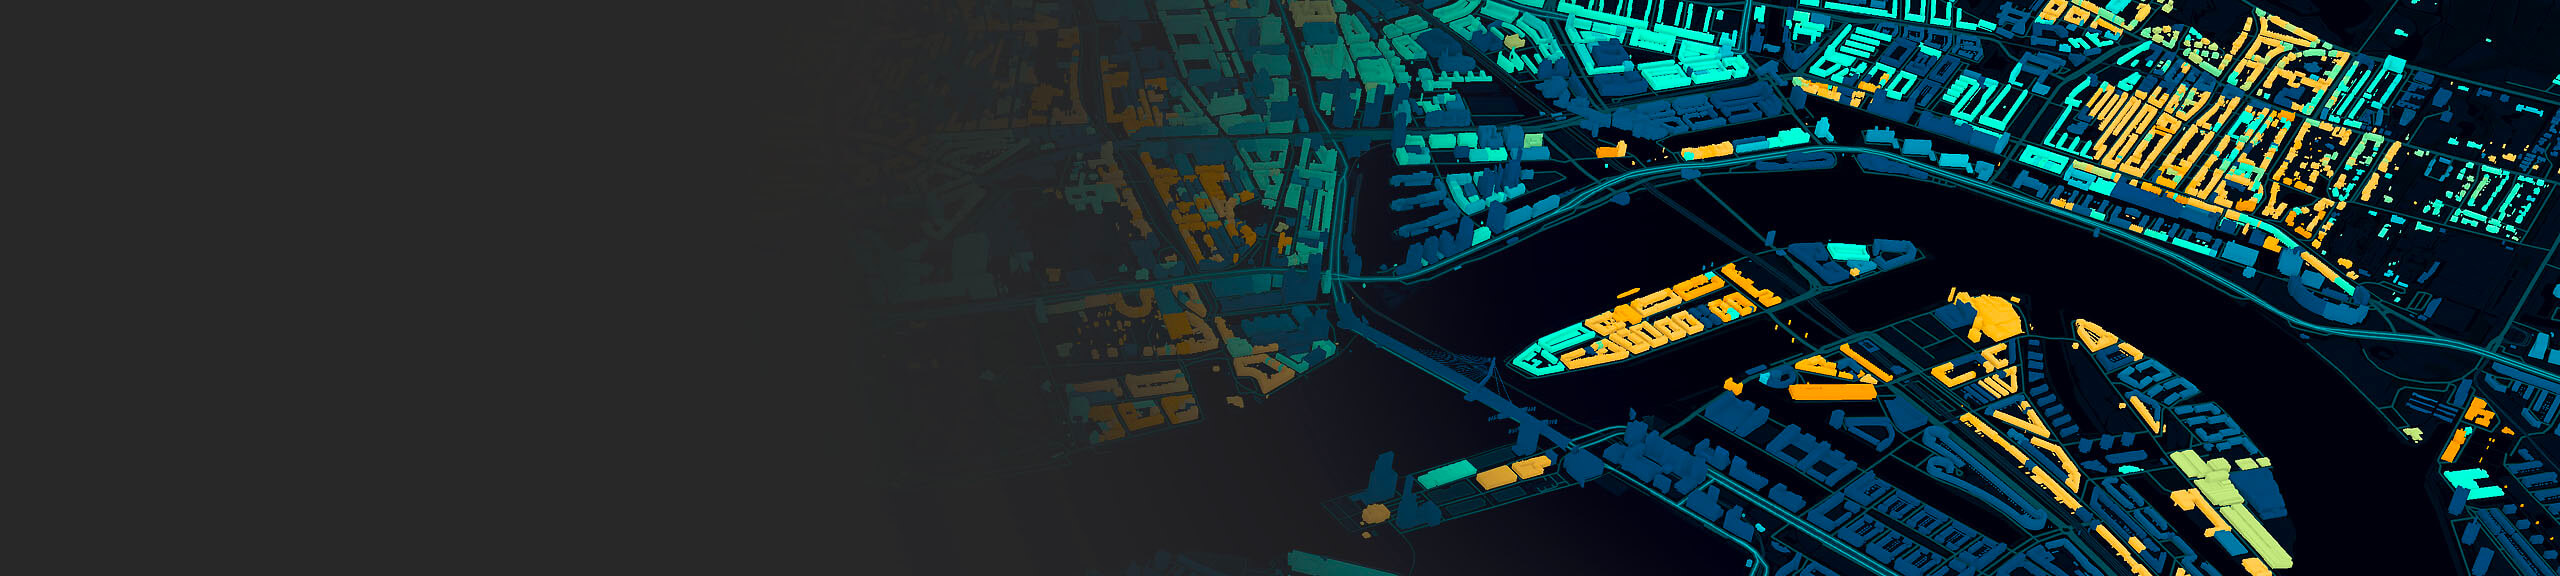 An aerial view of a 3D model of a city in navy blue, green, and yellow on a black background